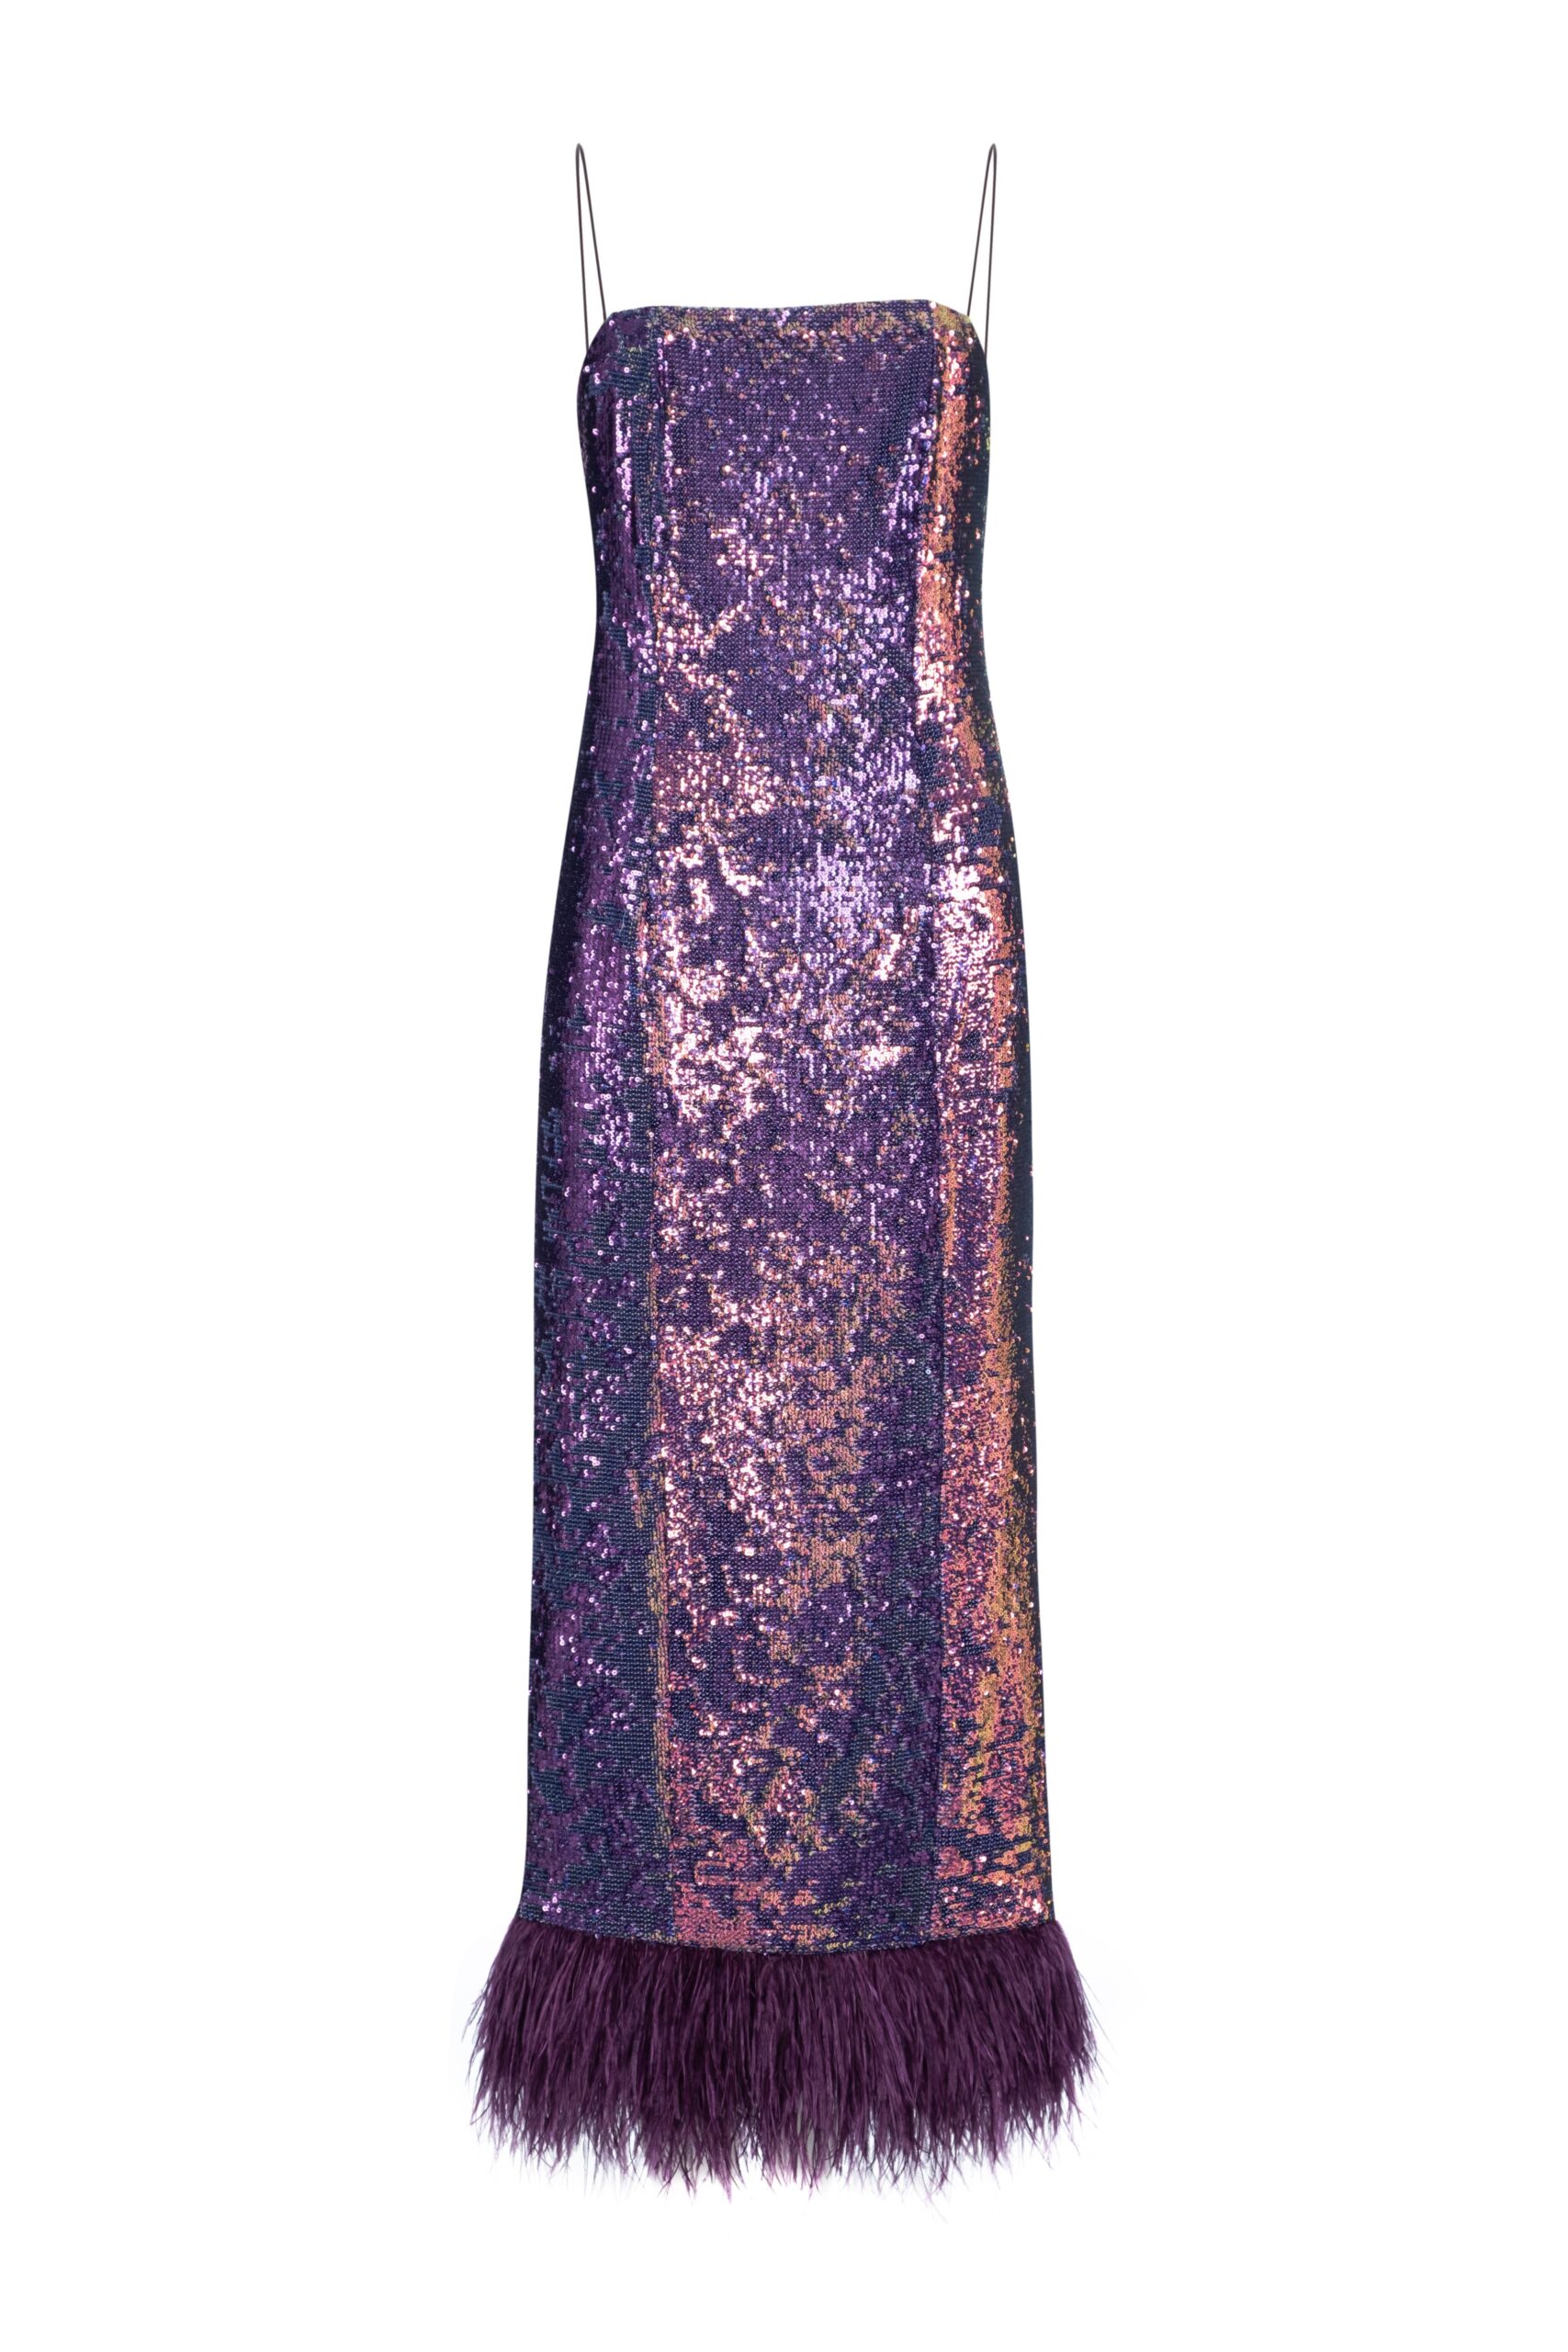 Plum Sequined Midi Dress with Feather - F.ILKK